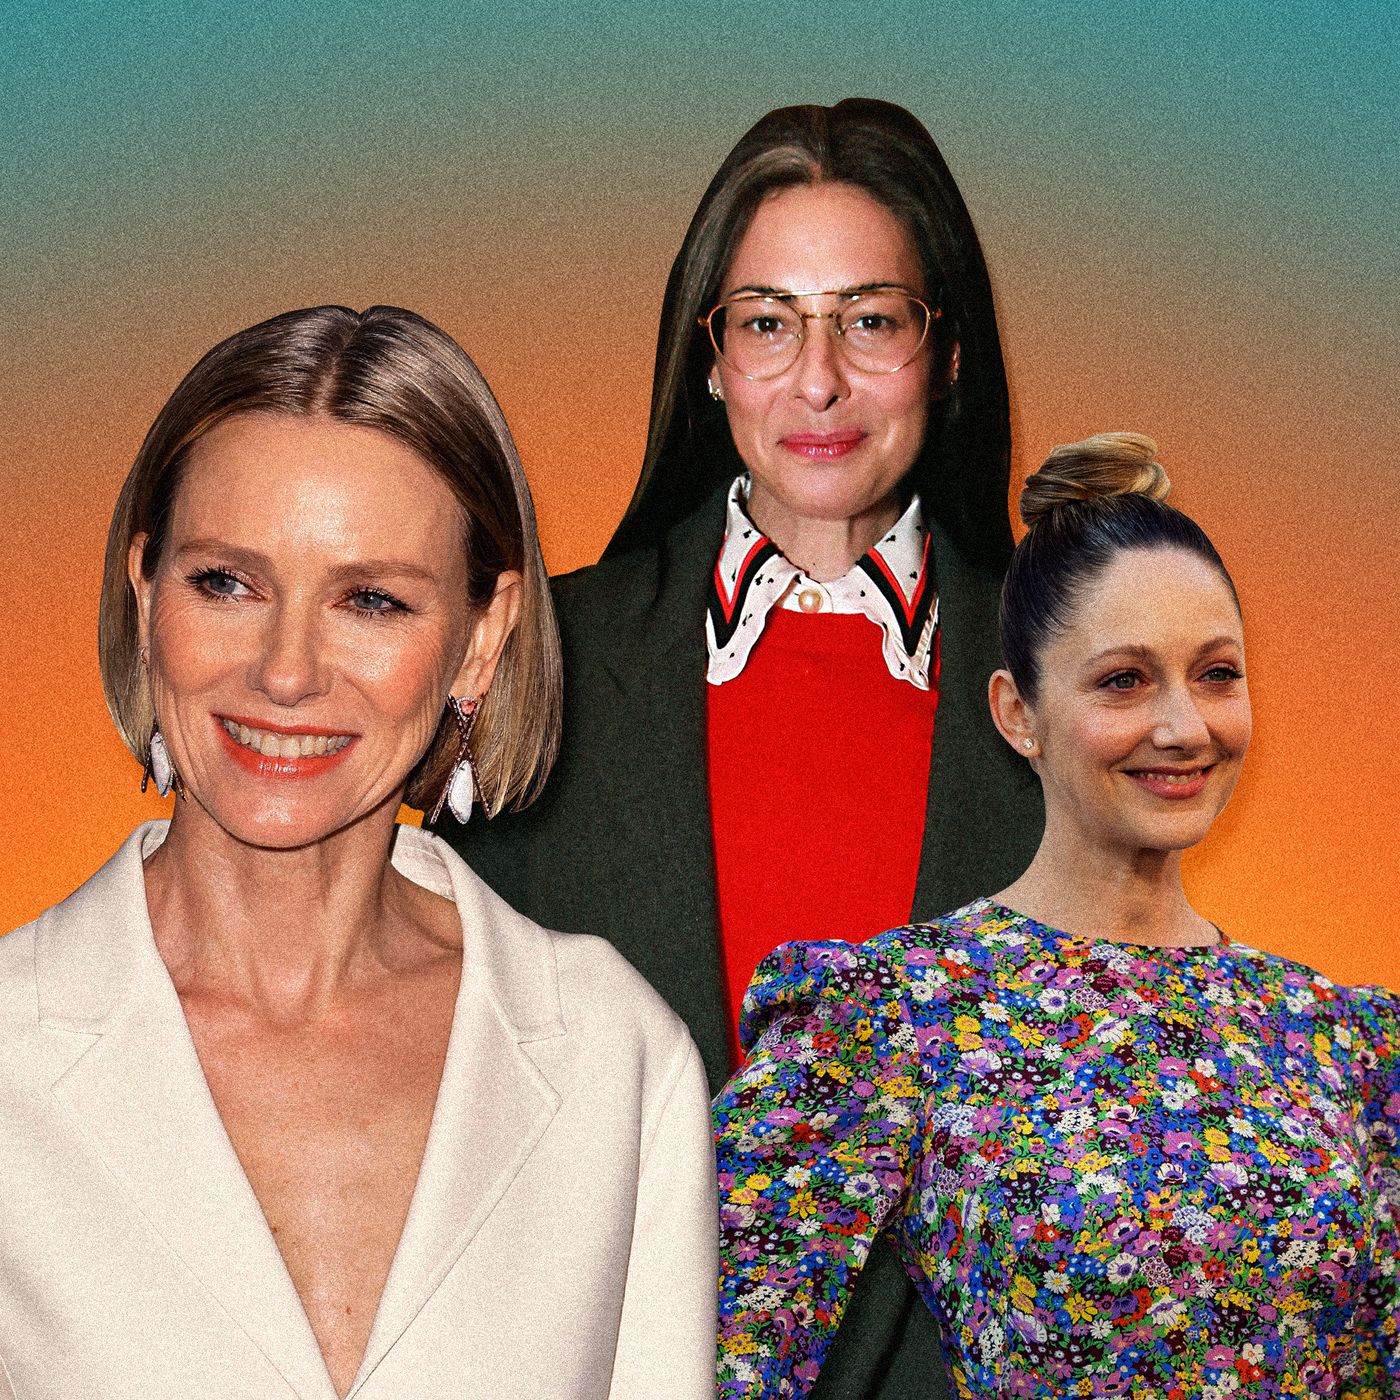 10 Best Series To Watch On TV For Women In Midlife